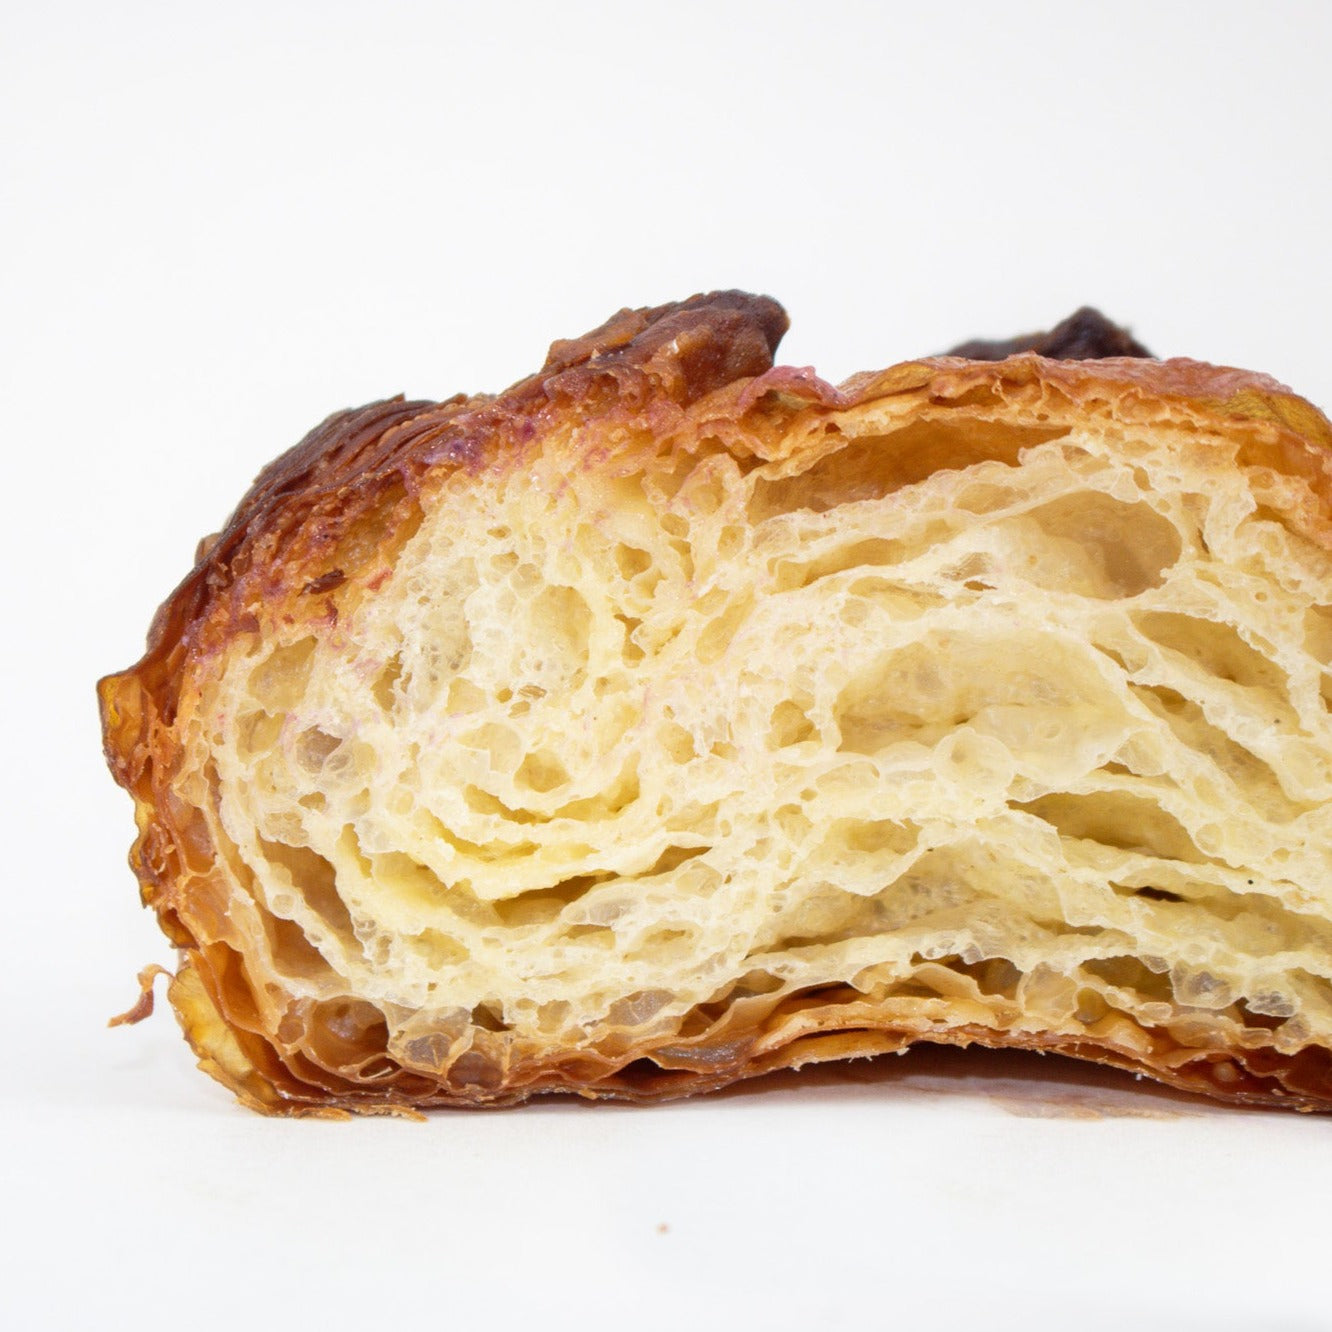 image of the pastry cut in half, showing us what is on the inside 